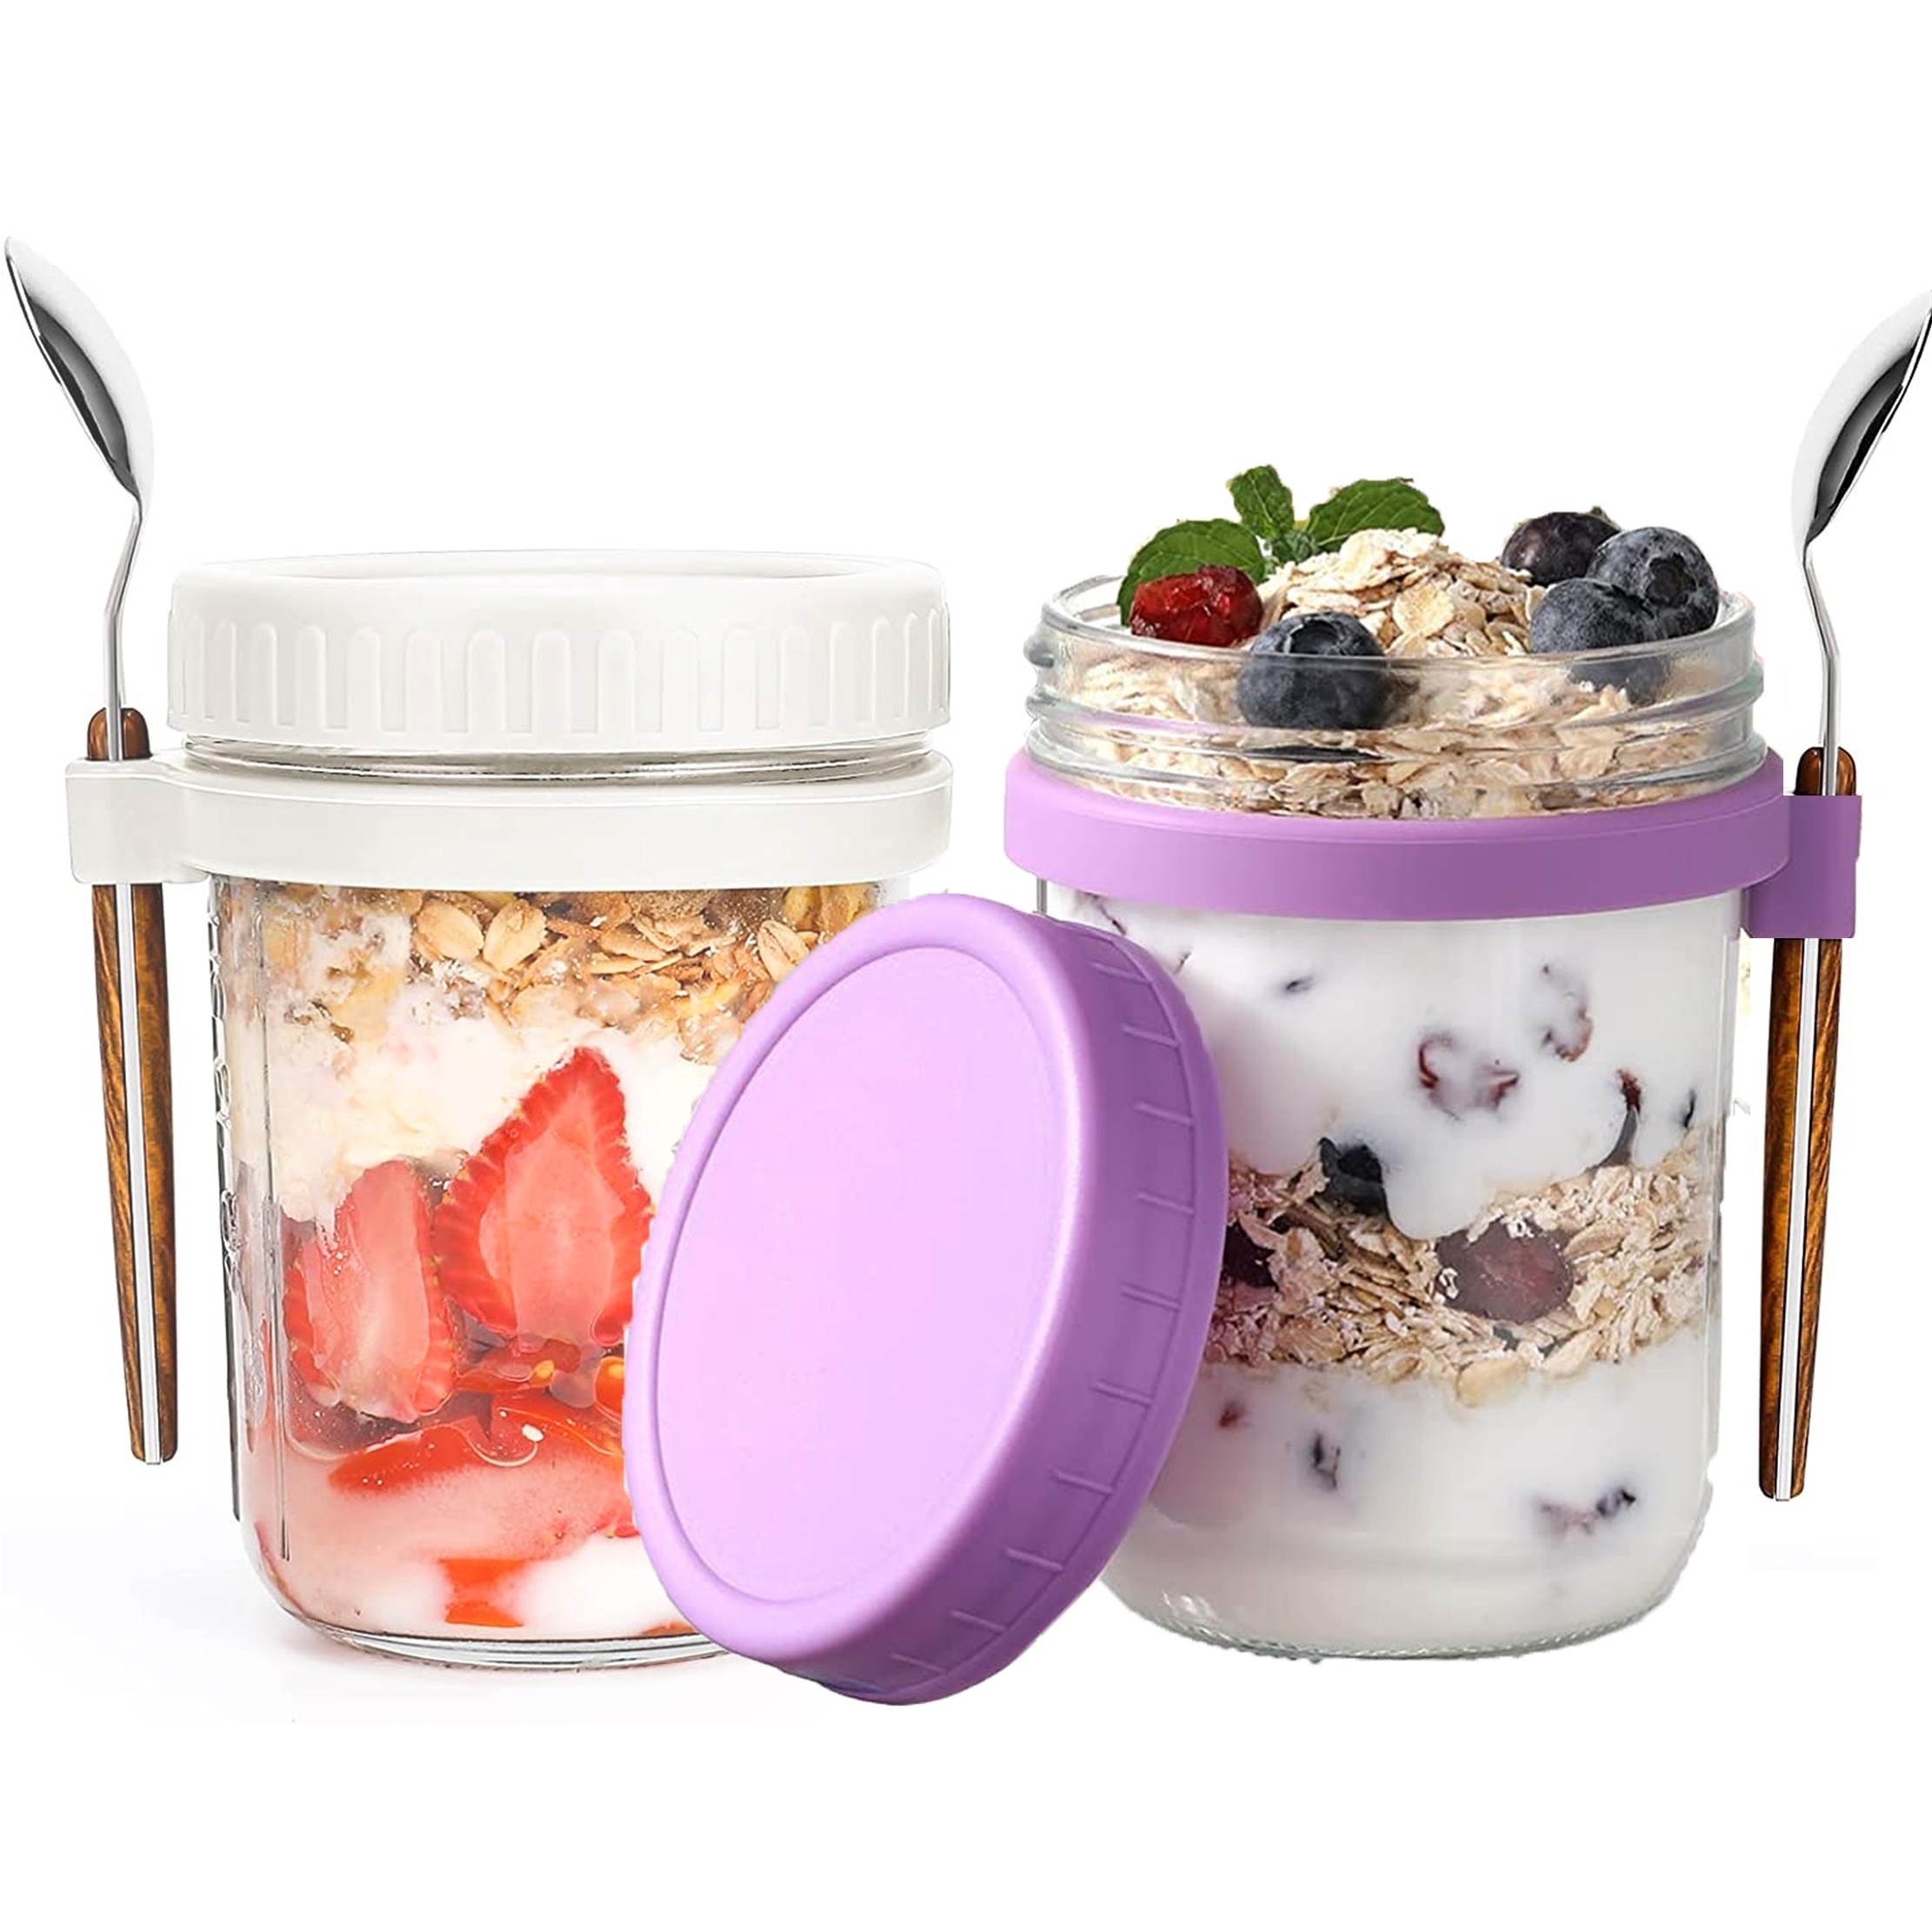 4PCS Overnight Oats Container with Lid and Spoon, 14oz Wide Mason Jar,  Reusable Meal Prep Container, Small Glass Container Jar, Food Storage  Container